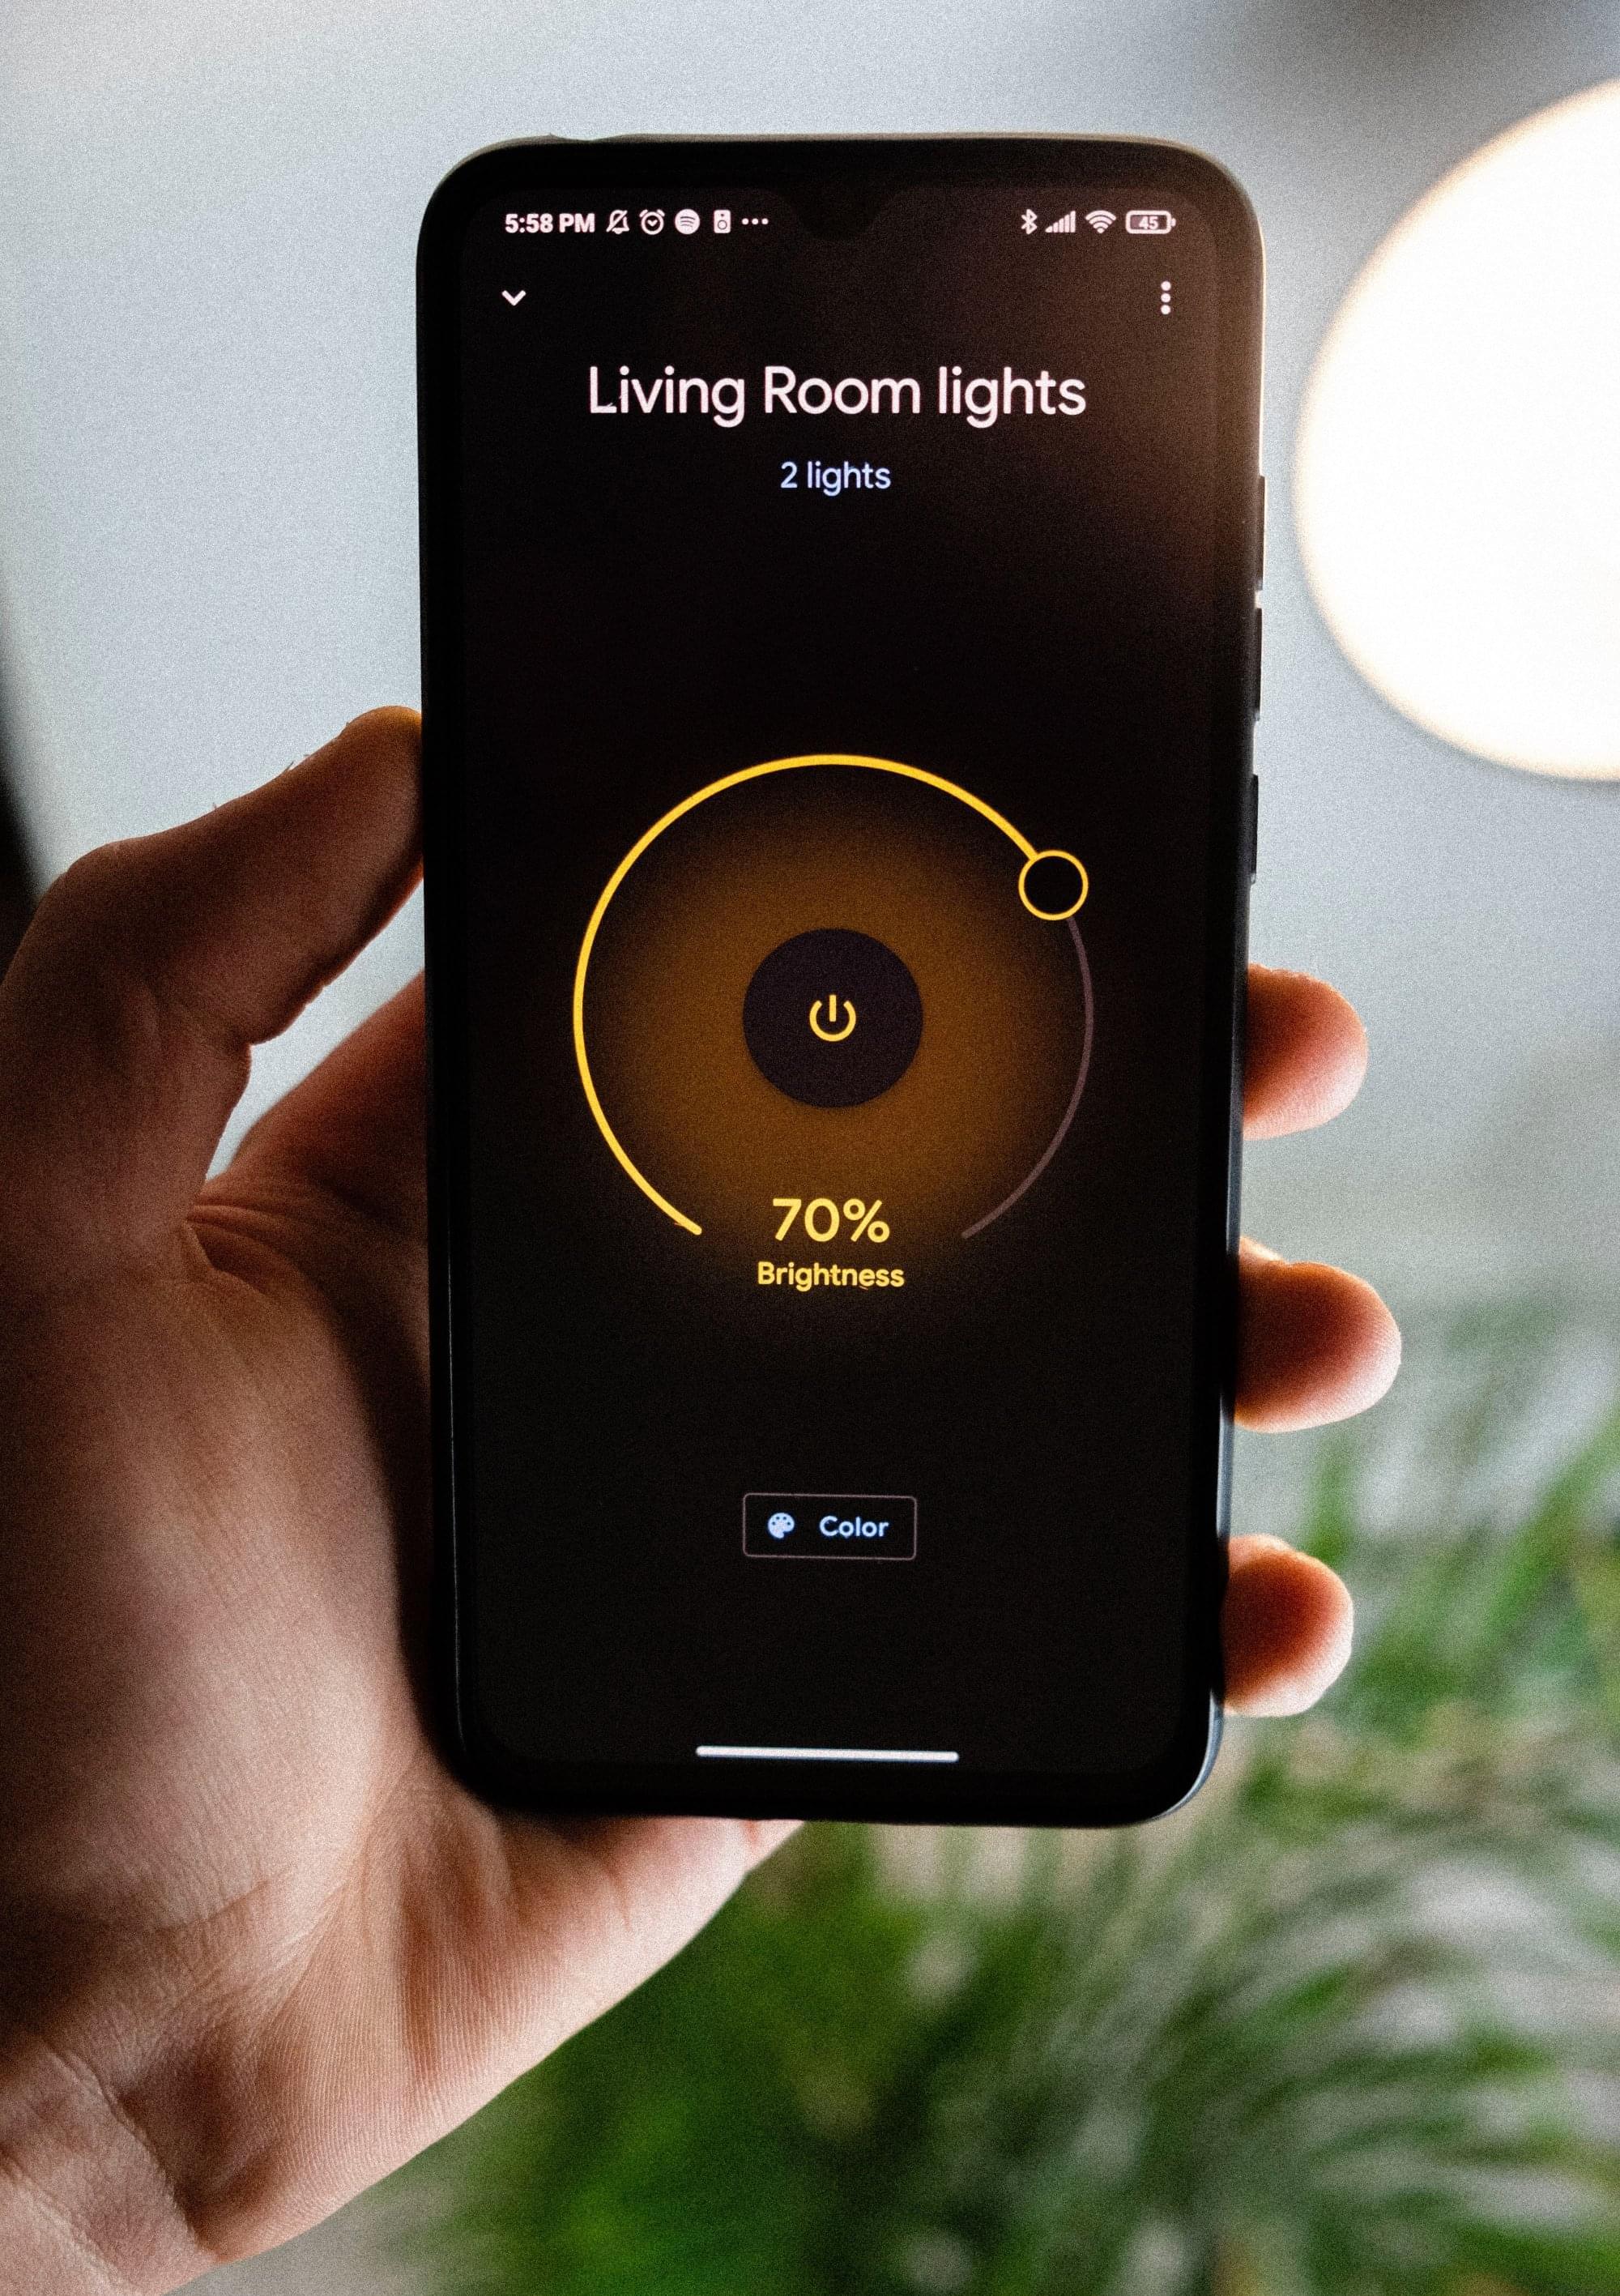 A smart phone with a screen showing control for the living room lights and their brightness